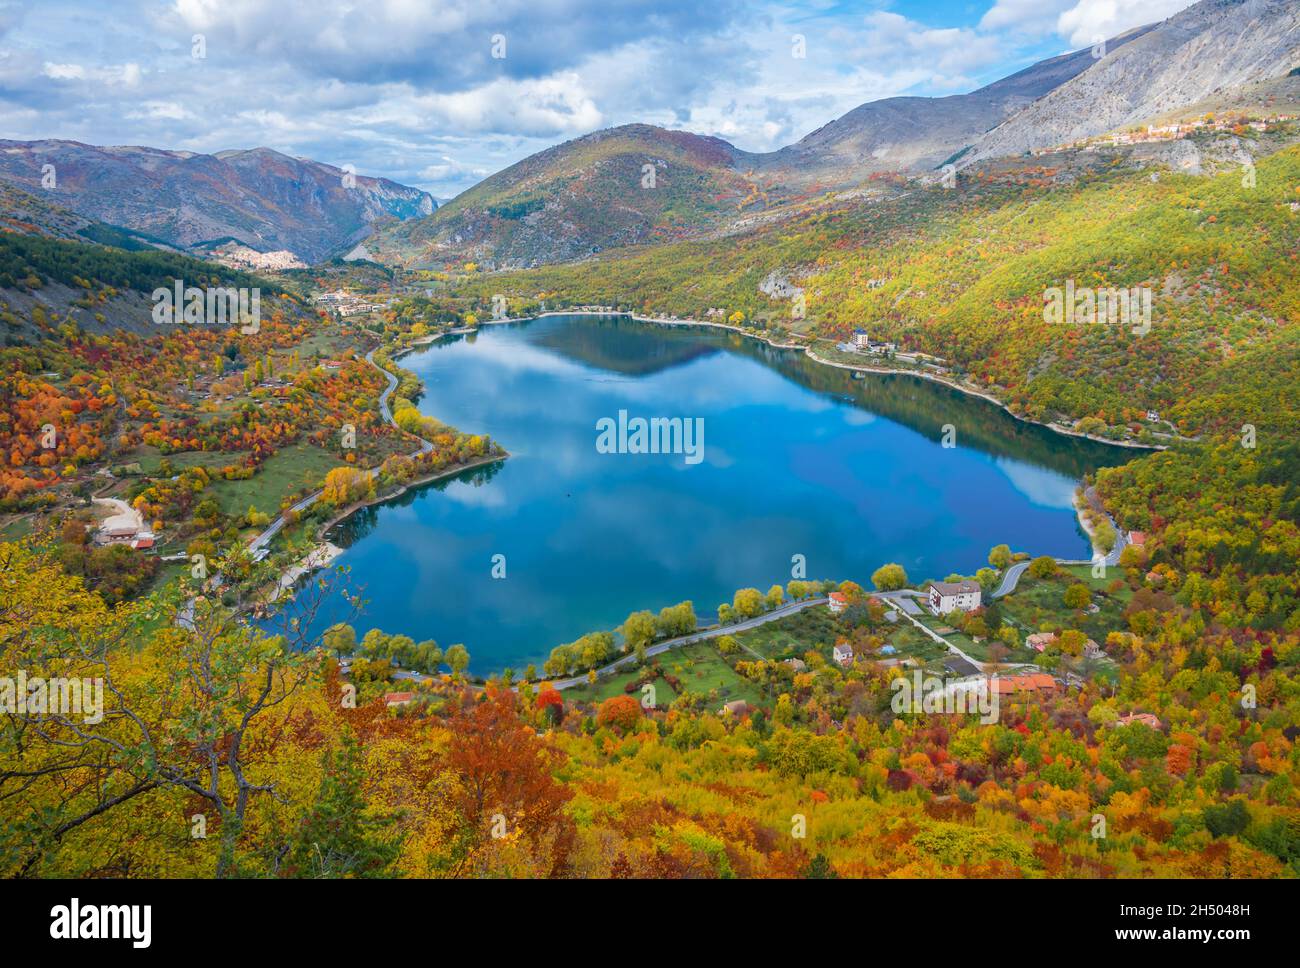 Lake Scanno (L'Aquila, Italy) - When nature is romantic: the heart - shaped lake on the Apennines mountains Abruzzo region, during the autumn foliage Stock Photo